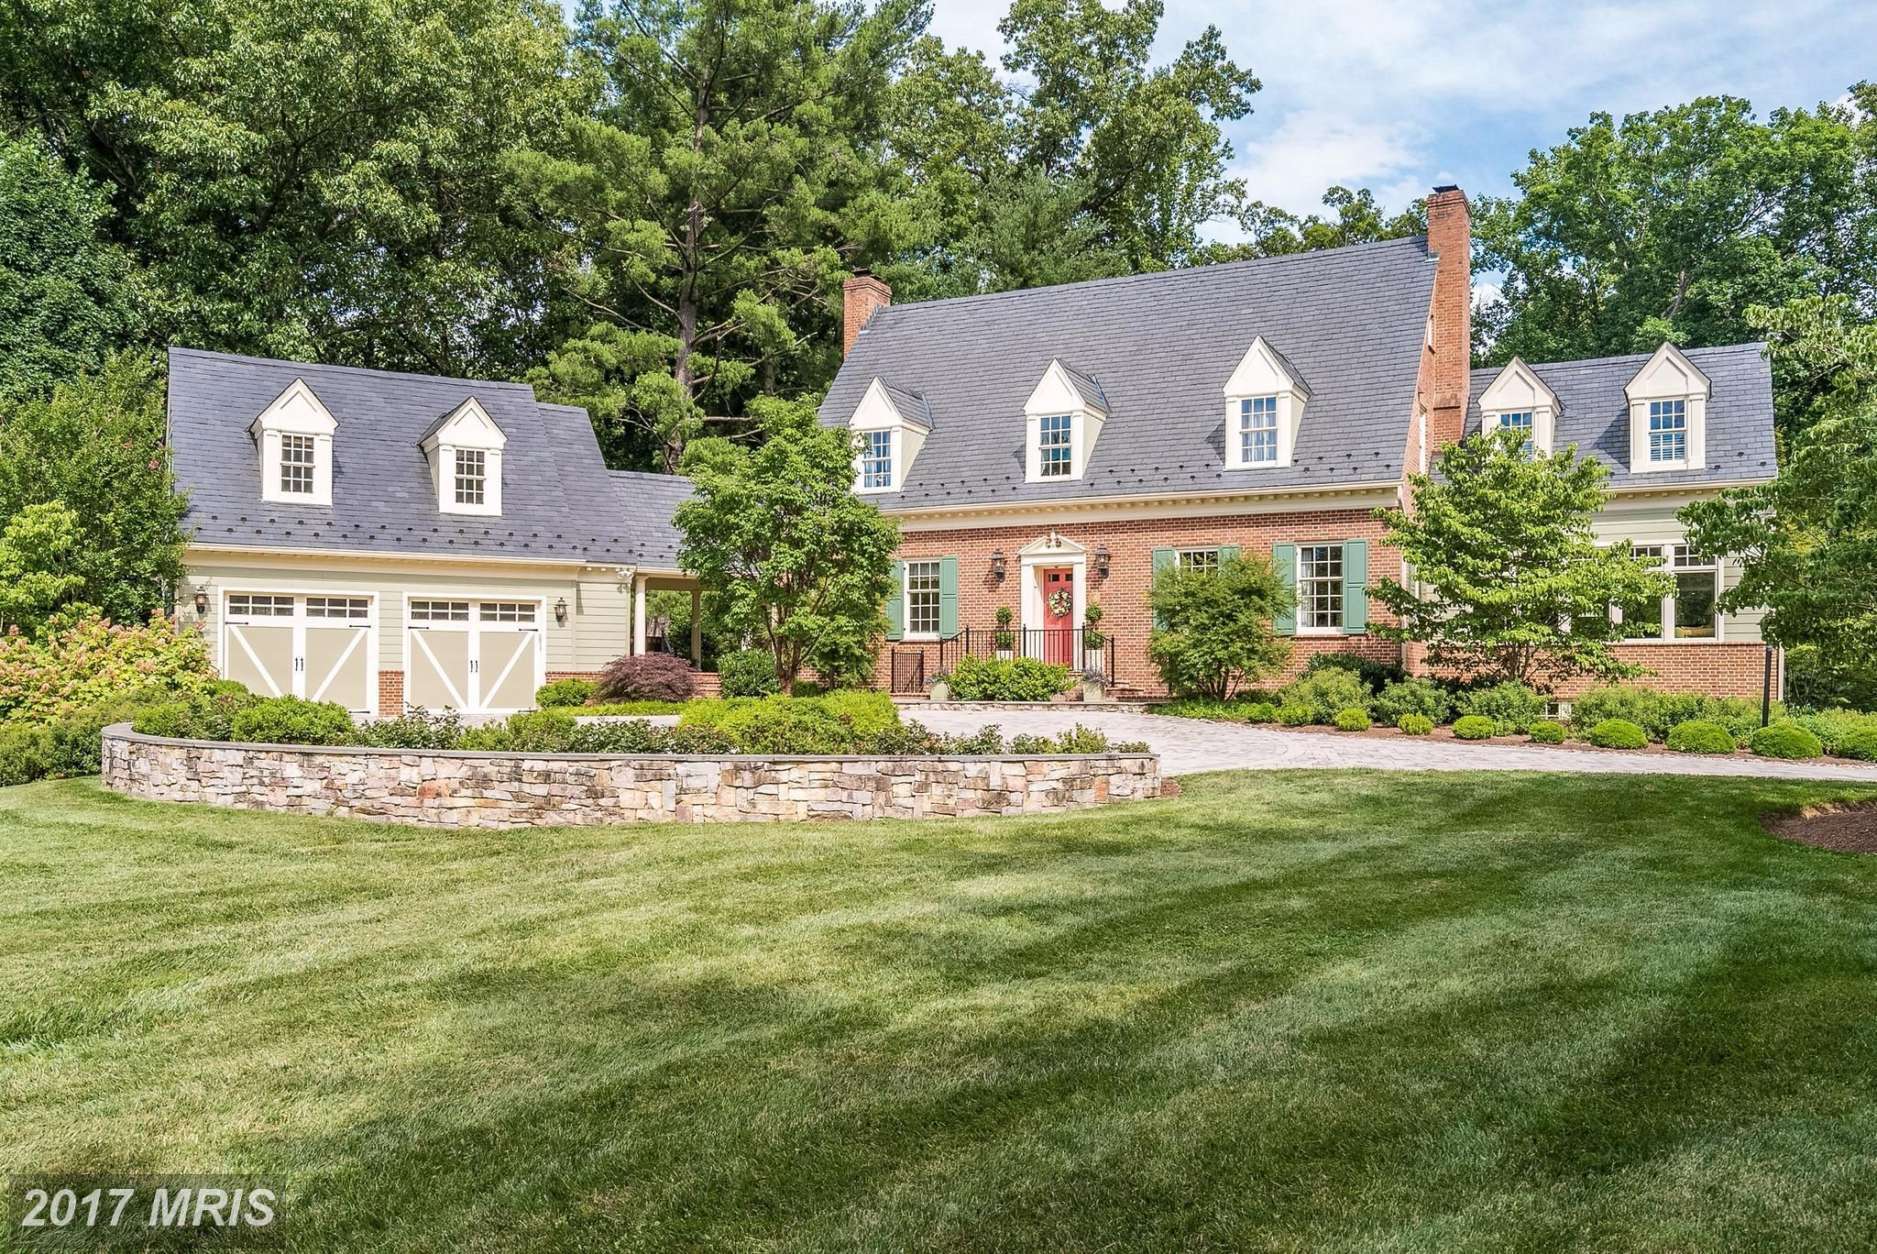 1323 Darnall Drive in Mclean sold for $3.595 million. (Courtesy Bright MLS)